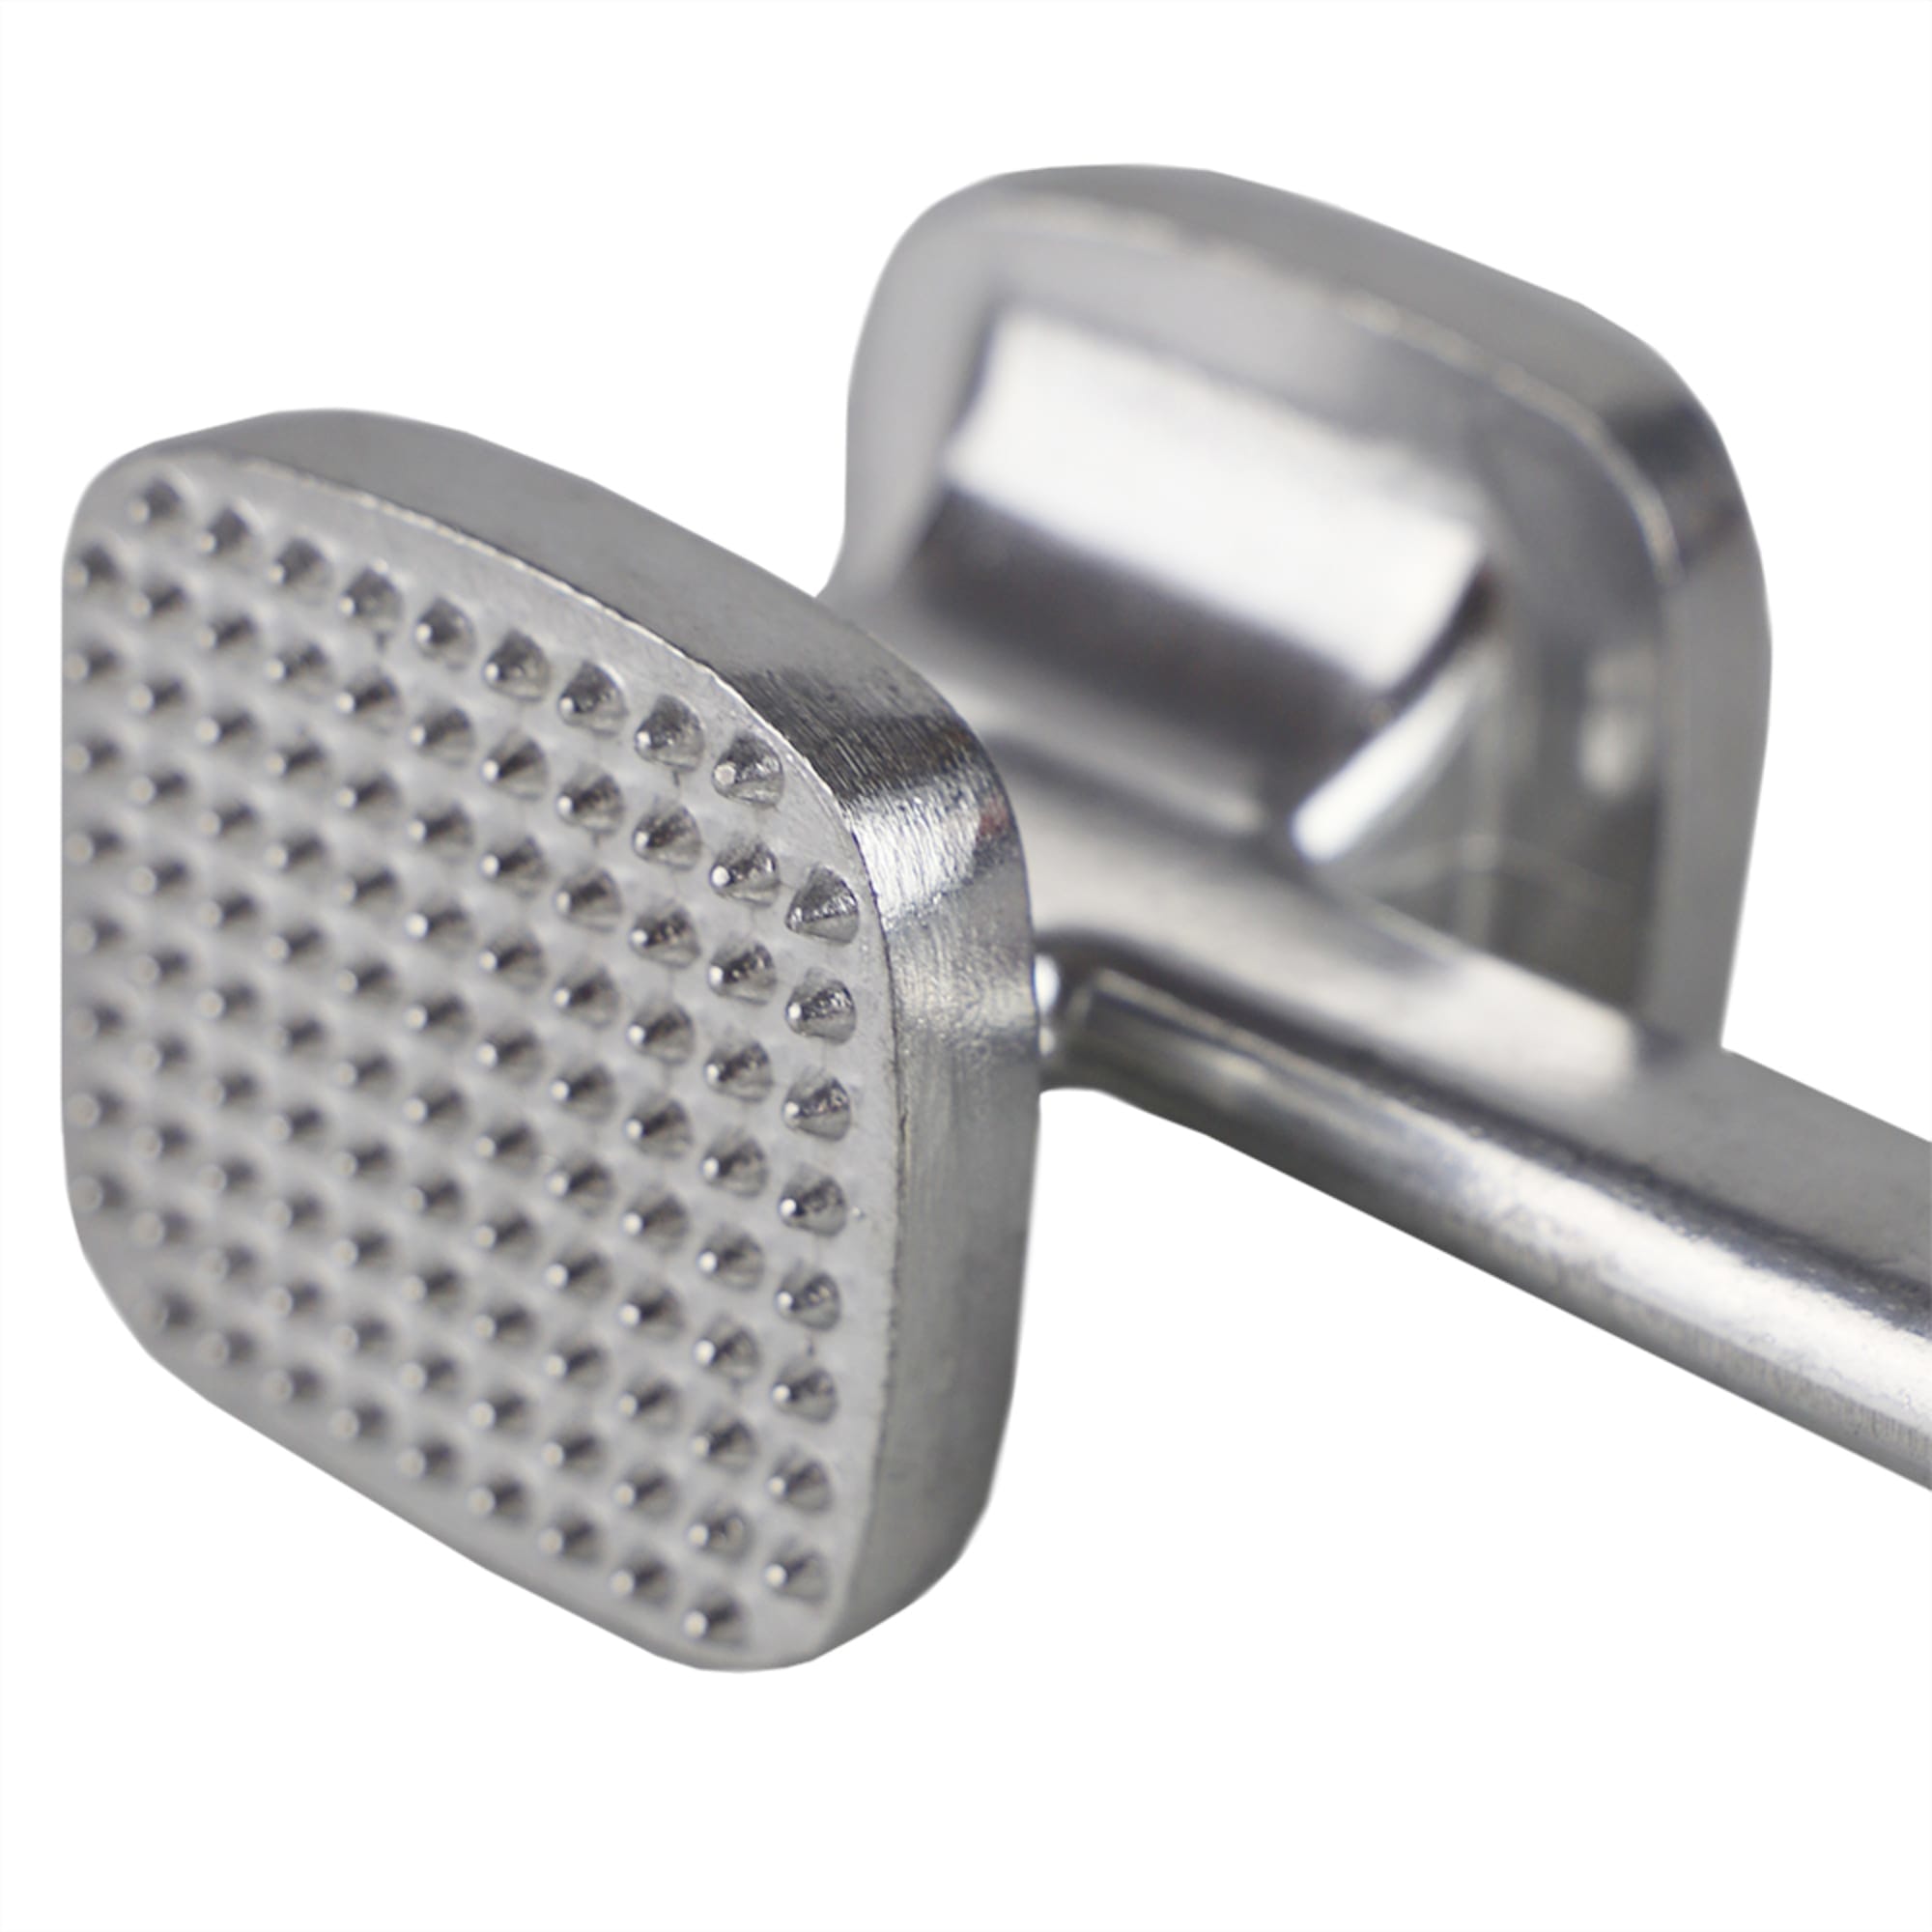 Home Basics Dual Sided Aluminum Tenderizer, Grey $6.00 EACH, CASE PACK OF 12